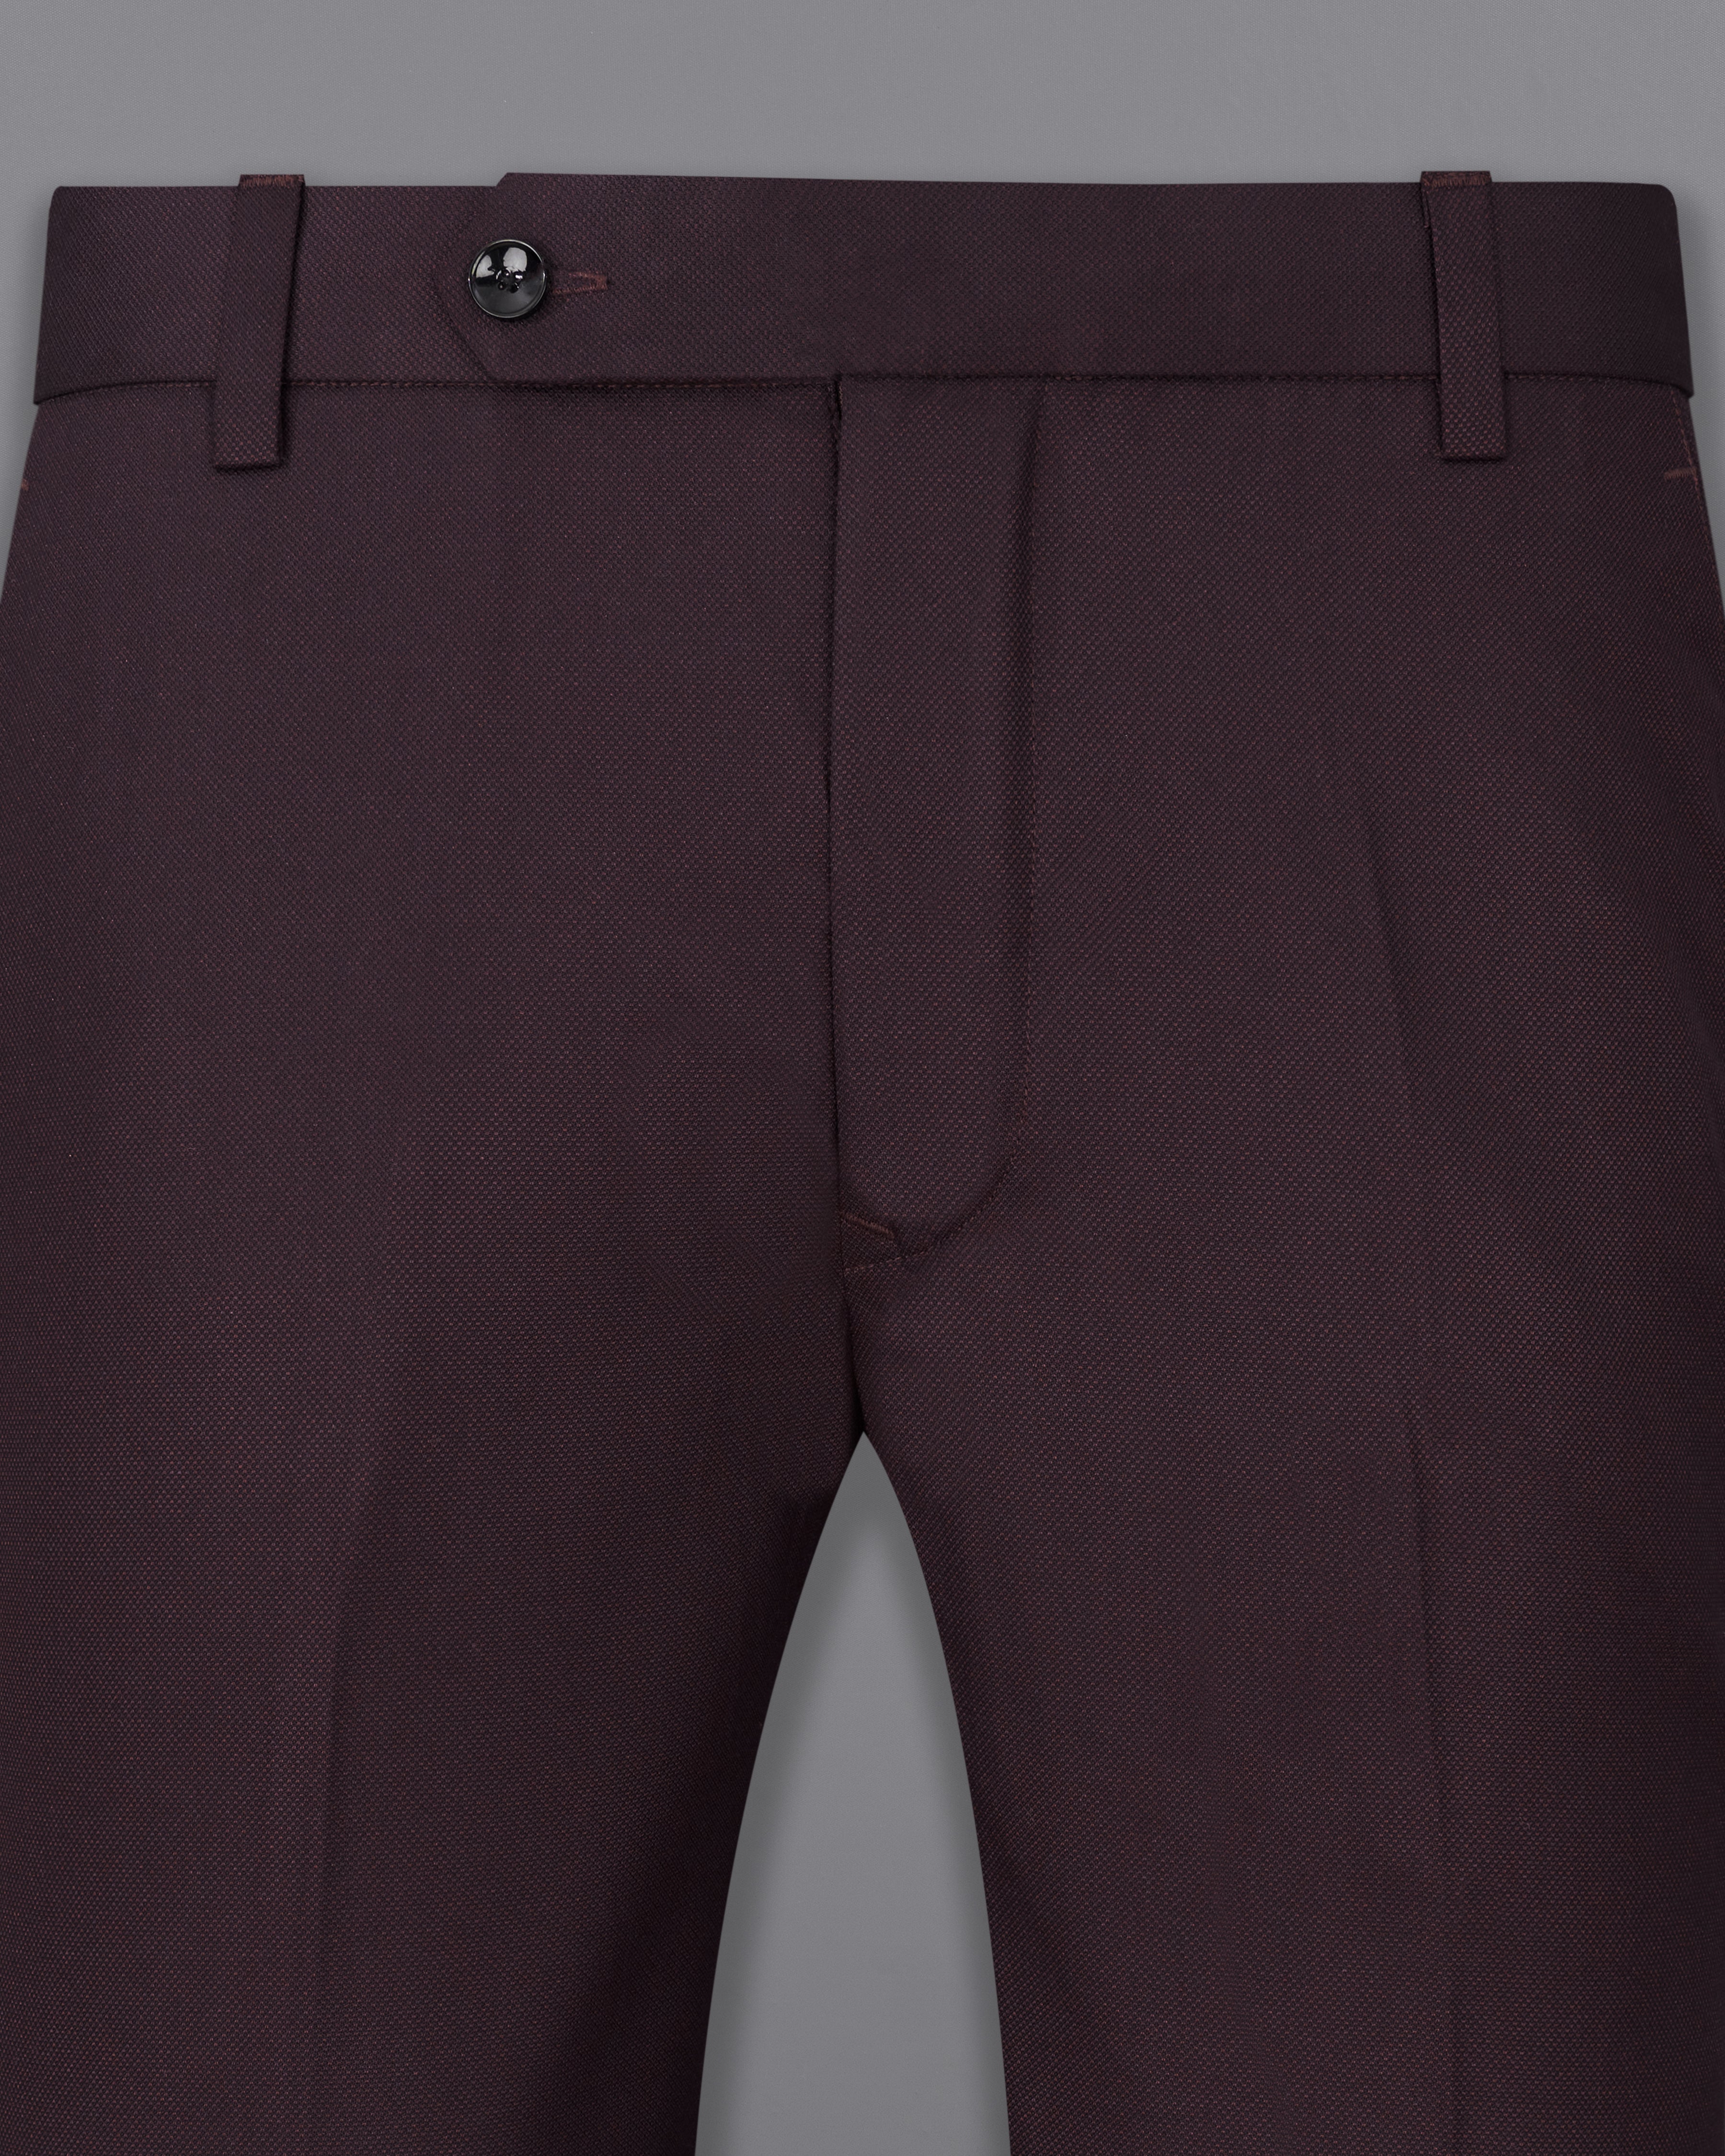 Aubergine Maroon Cross Buttoned Bandhgala Suit ST2291-CBG-36, ST2291-CBG-38, ST2291-CBG-40, ST2291-CBG-42, ST2291-CBG-44, ST2291-CBG-46, ST2291-CBG-48, ST2291-CBG-50, ST2291-CBG-52, ST2291-CBG-54, ST2291-CBG-56, ST2291-CBG-58, ST2291-CBG-60